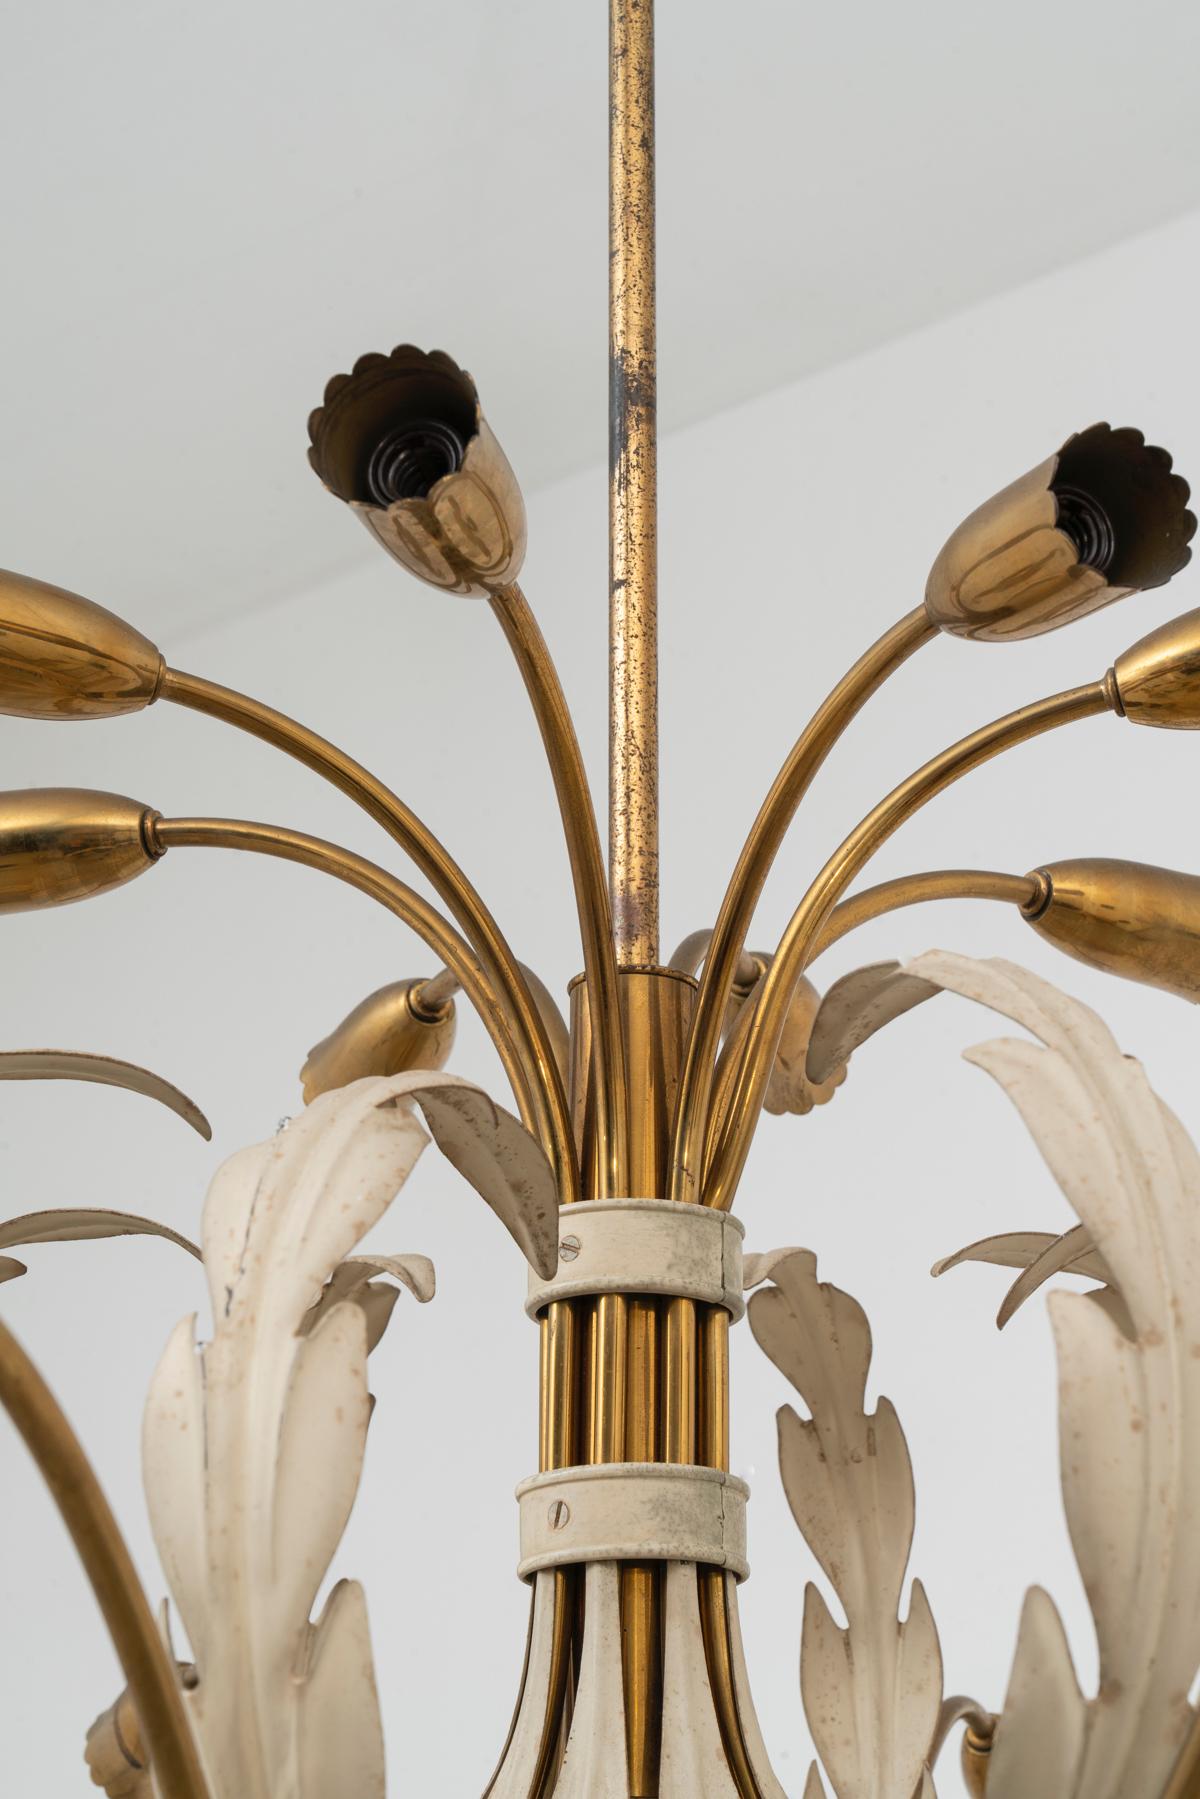 Polished Strada Milano Large 16 Lights Italian Brass Midcentury Chandelier, Late 1940s For Sale